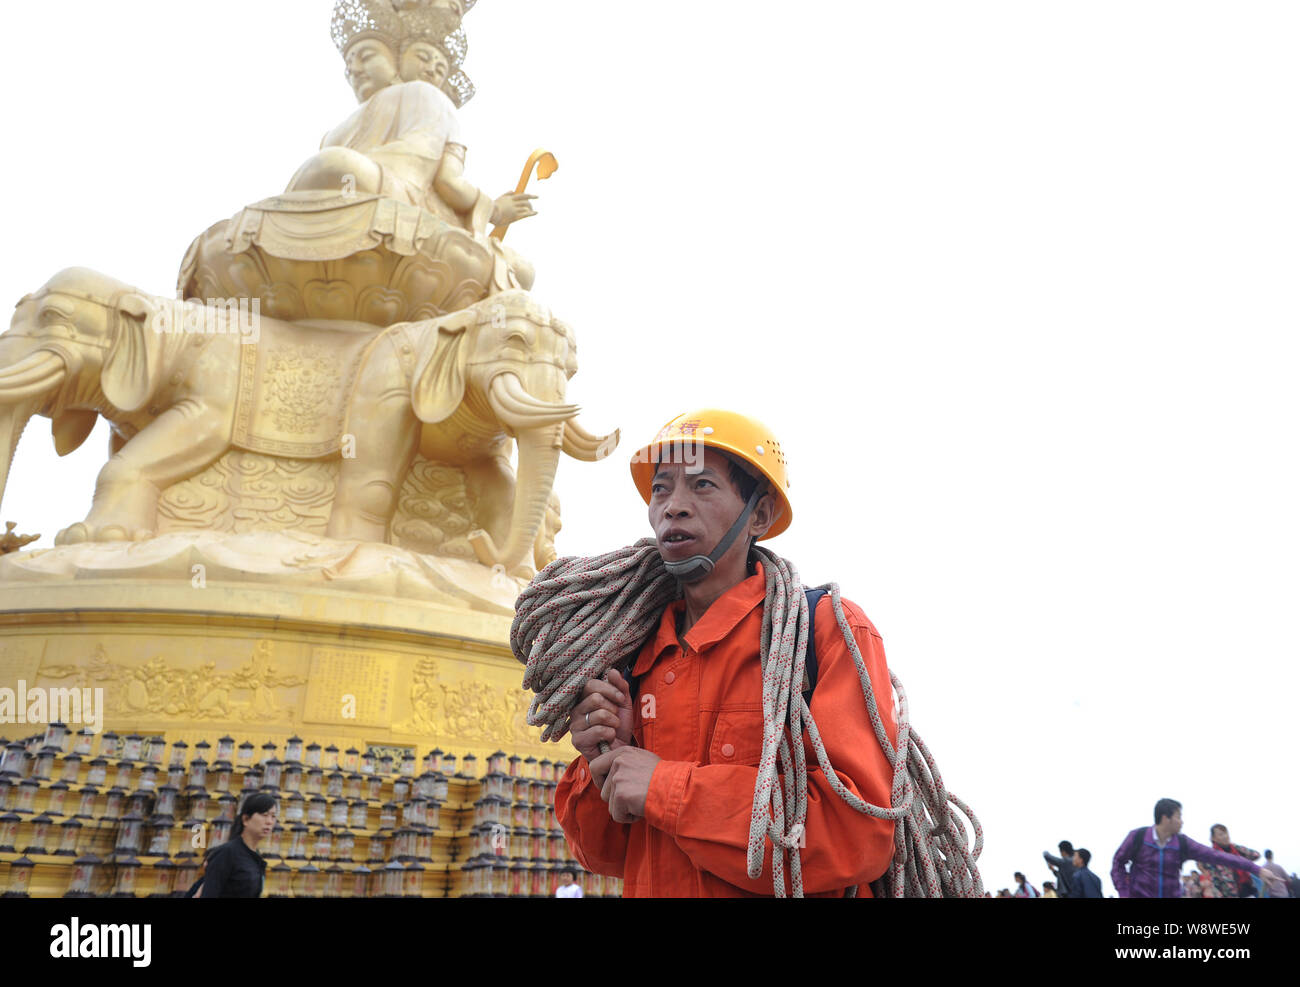 A Chinese cleaner carrying rope walks past the golden Buddha statue on the Golden Summit of Mount Emei (Emei Mountain) before climbing down a cliff to Stock Photo